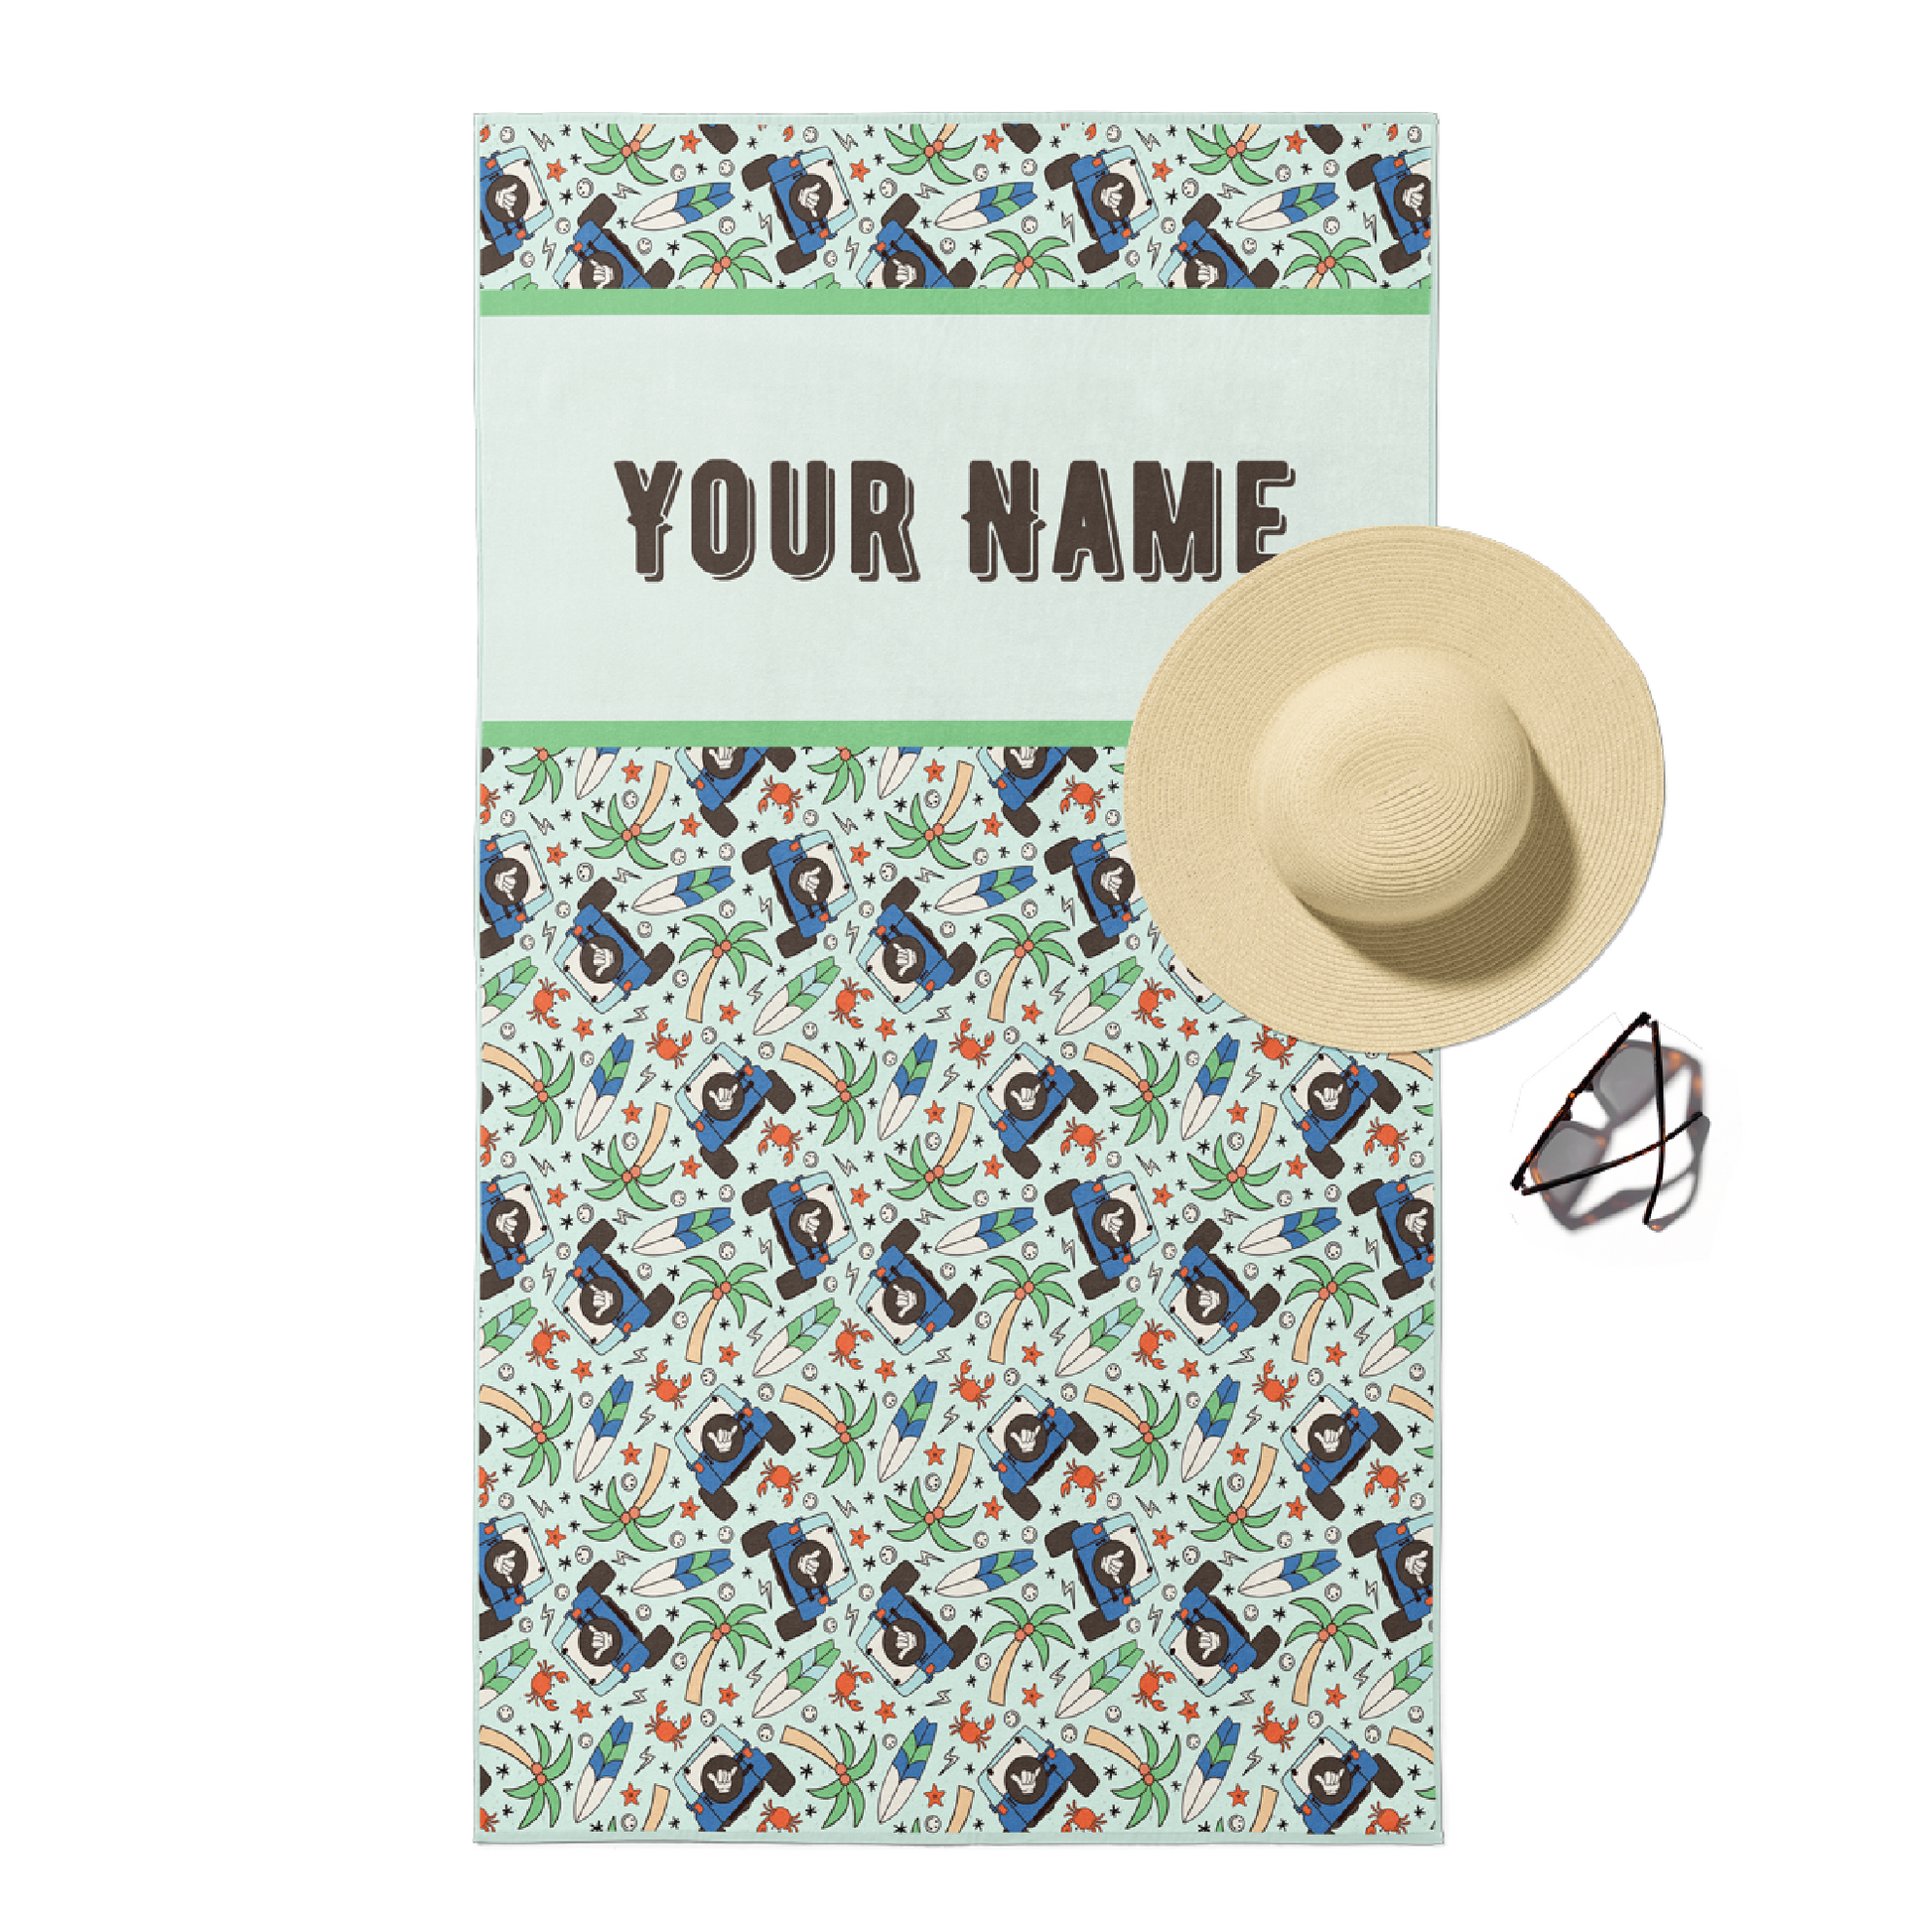 Beach towel in light blue and green boy towel with customizable text.